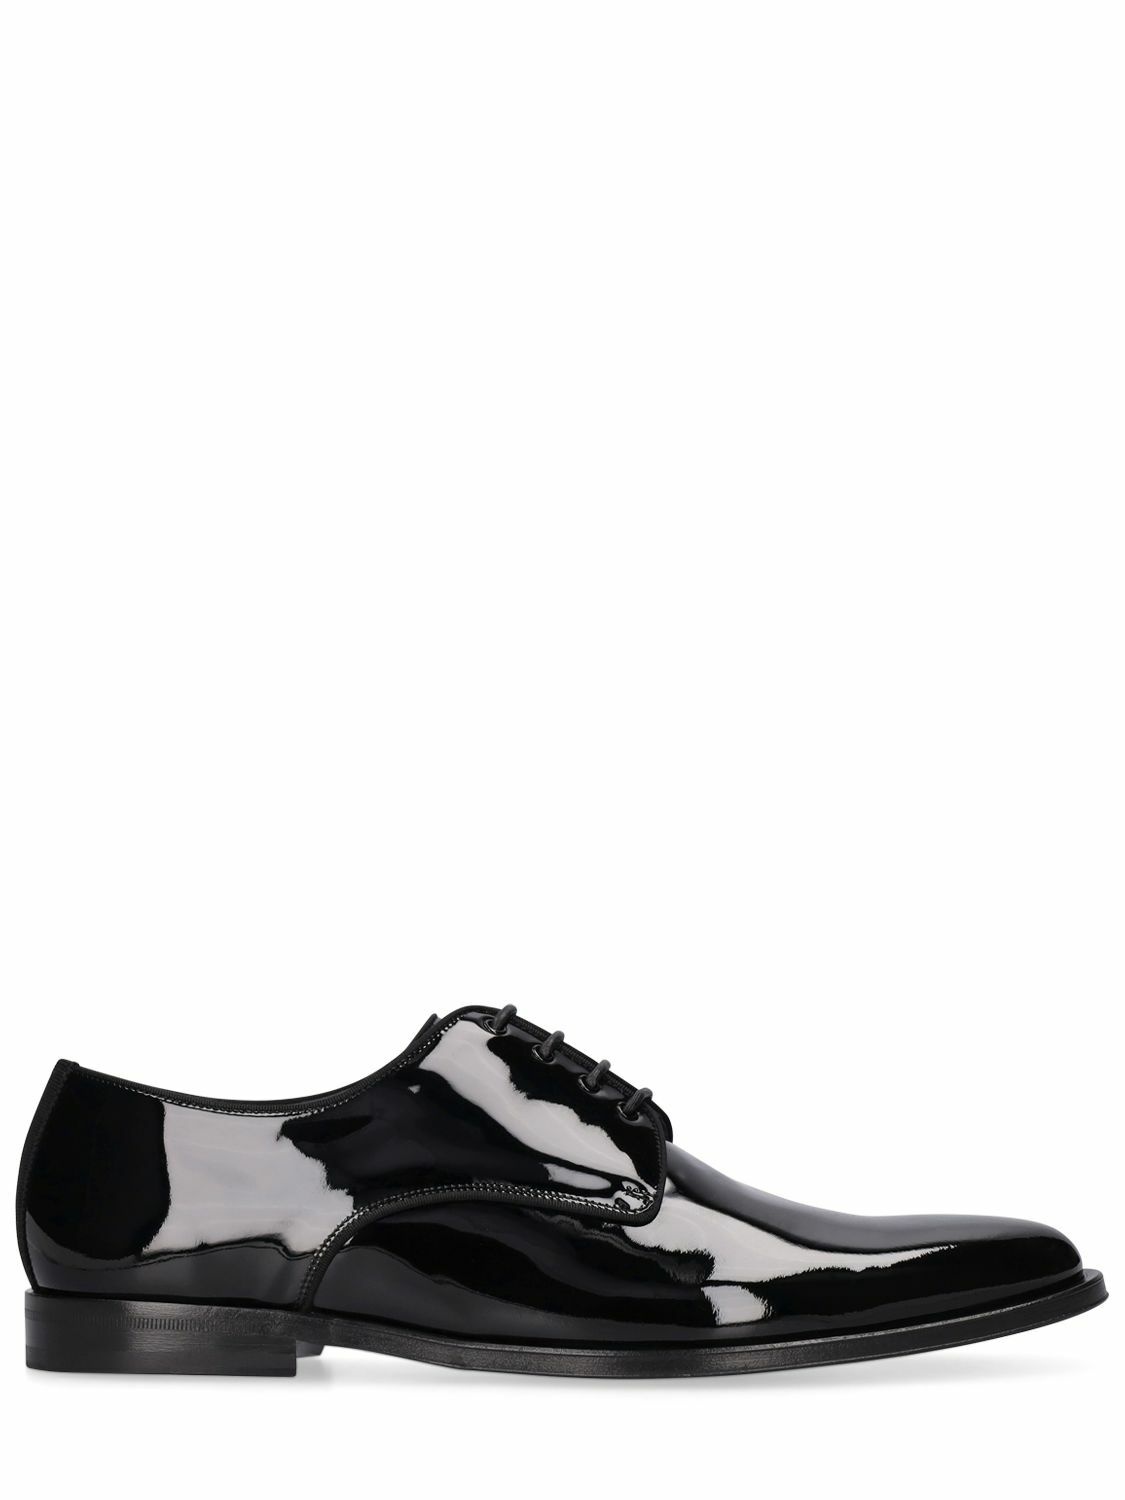 Photo: DOLCE & GABBANA - Patent Leather Derby Shoes